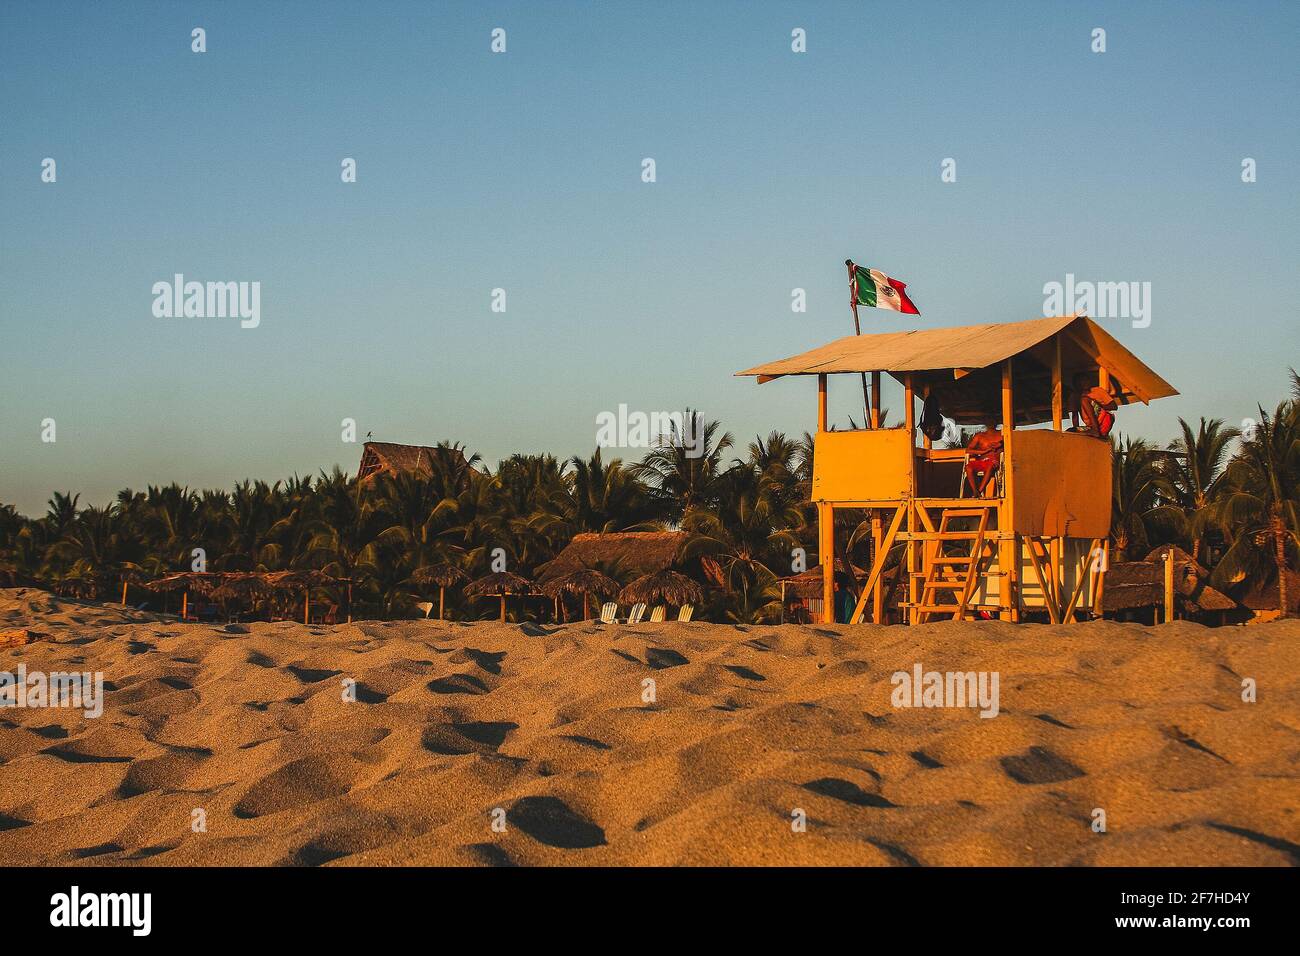 Typical beach in Puerto Escondido, Mexico, view towards the beach house, golden sand, trees and blue sky. Mexican lifeguards on duty. Stock Photo